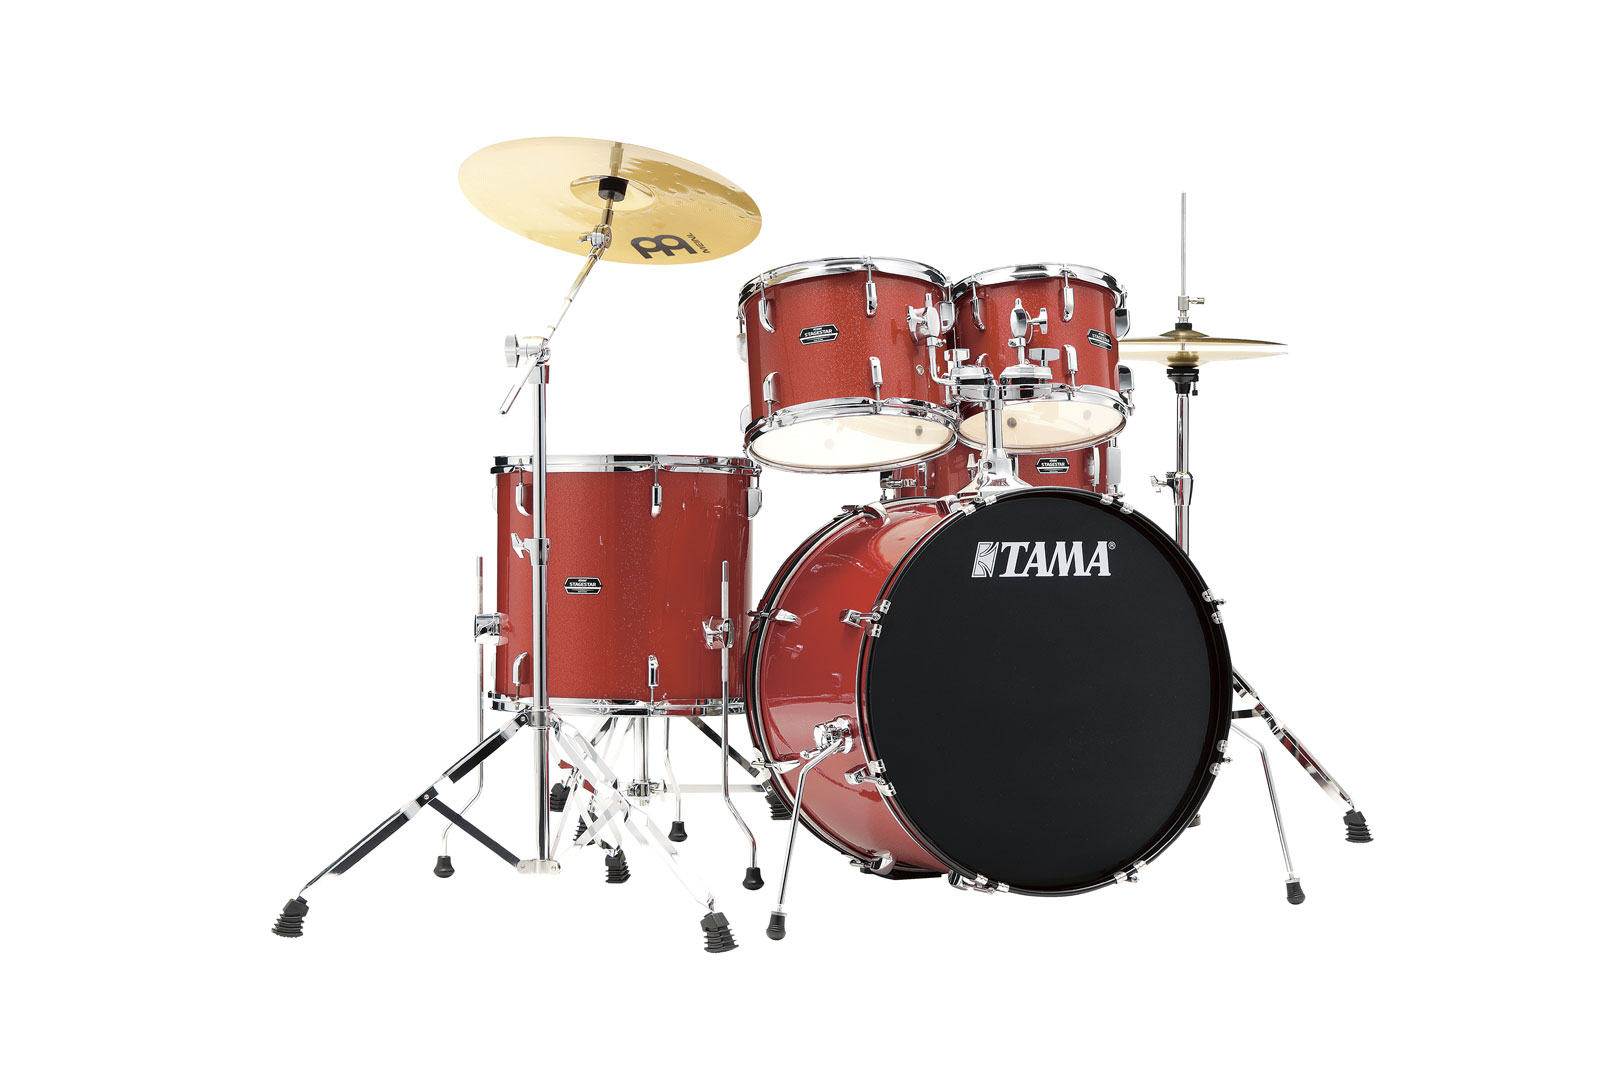 TAMA STAGESTAR STAGE 22 - CANDY RED SPARKLE